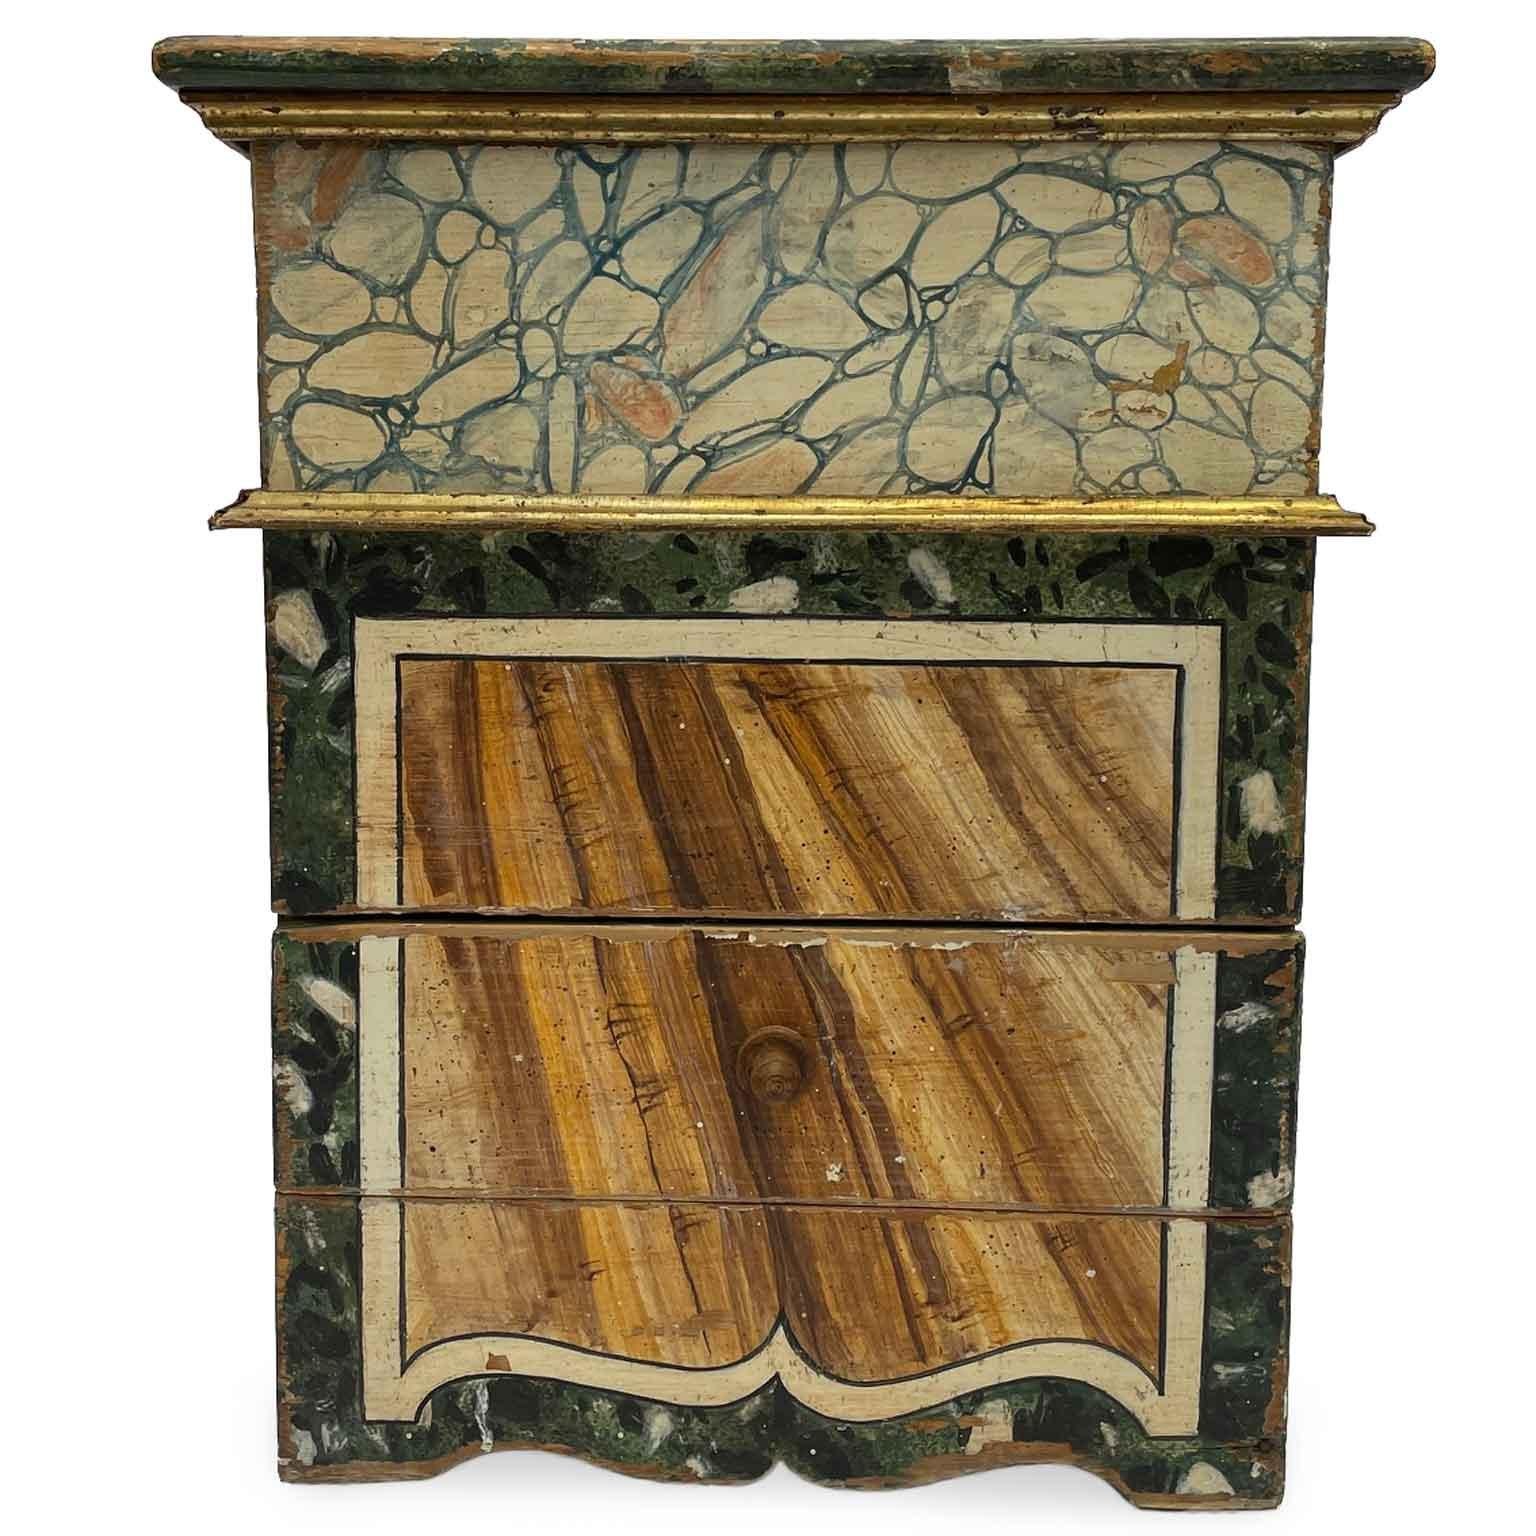 Pair Of Early 1900's Nightstands from Central Italy Lacquered in Faux Marble  in shades of green, with a central drawer and flip-open top. The boxy form is mellowed by the outlines near the lower supports, the gilded frame in the middle part, and in